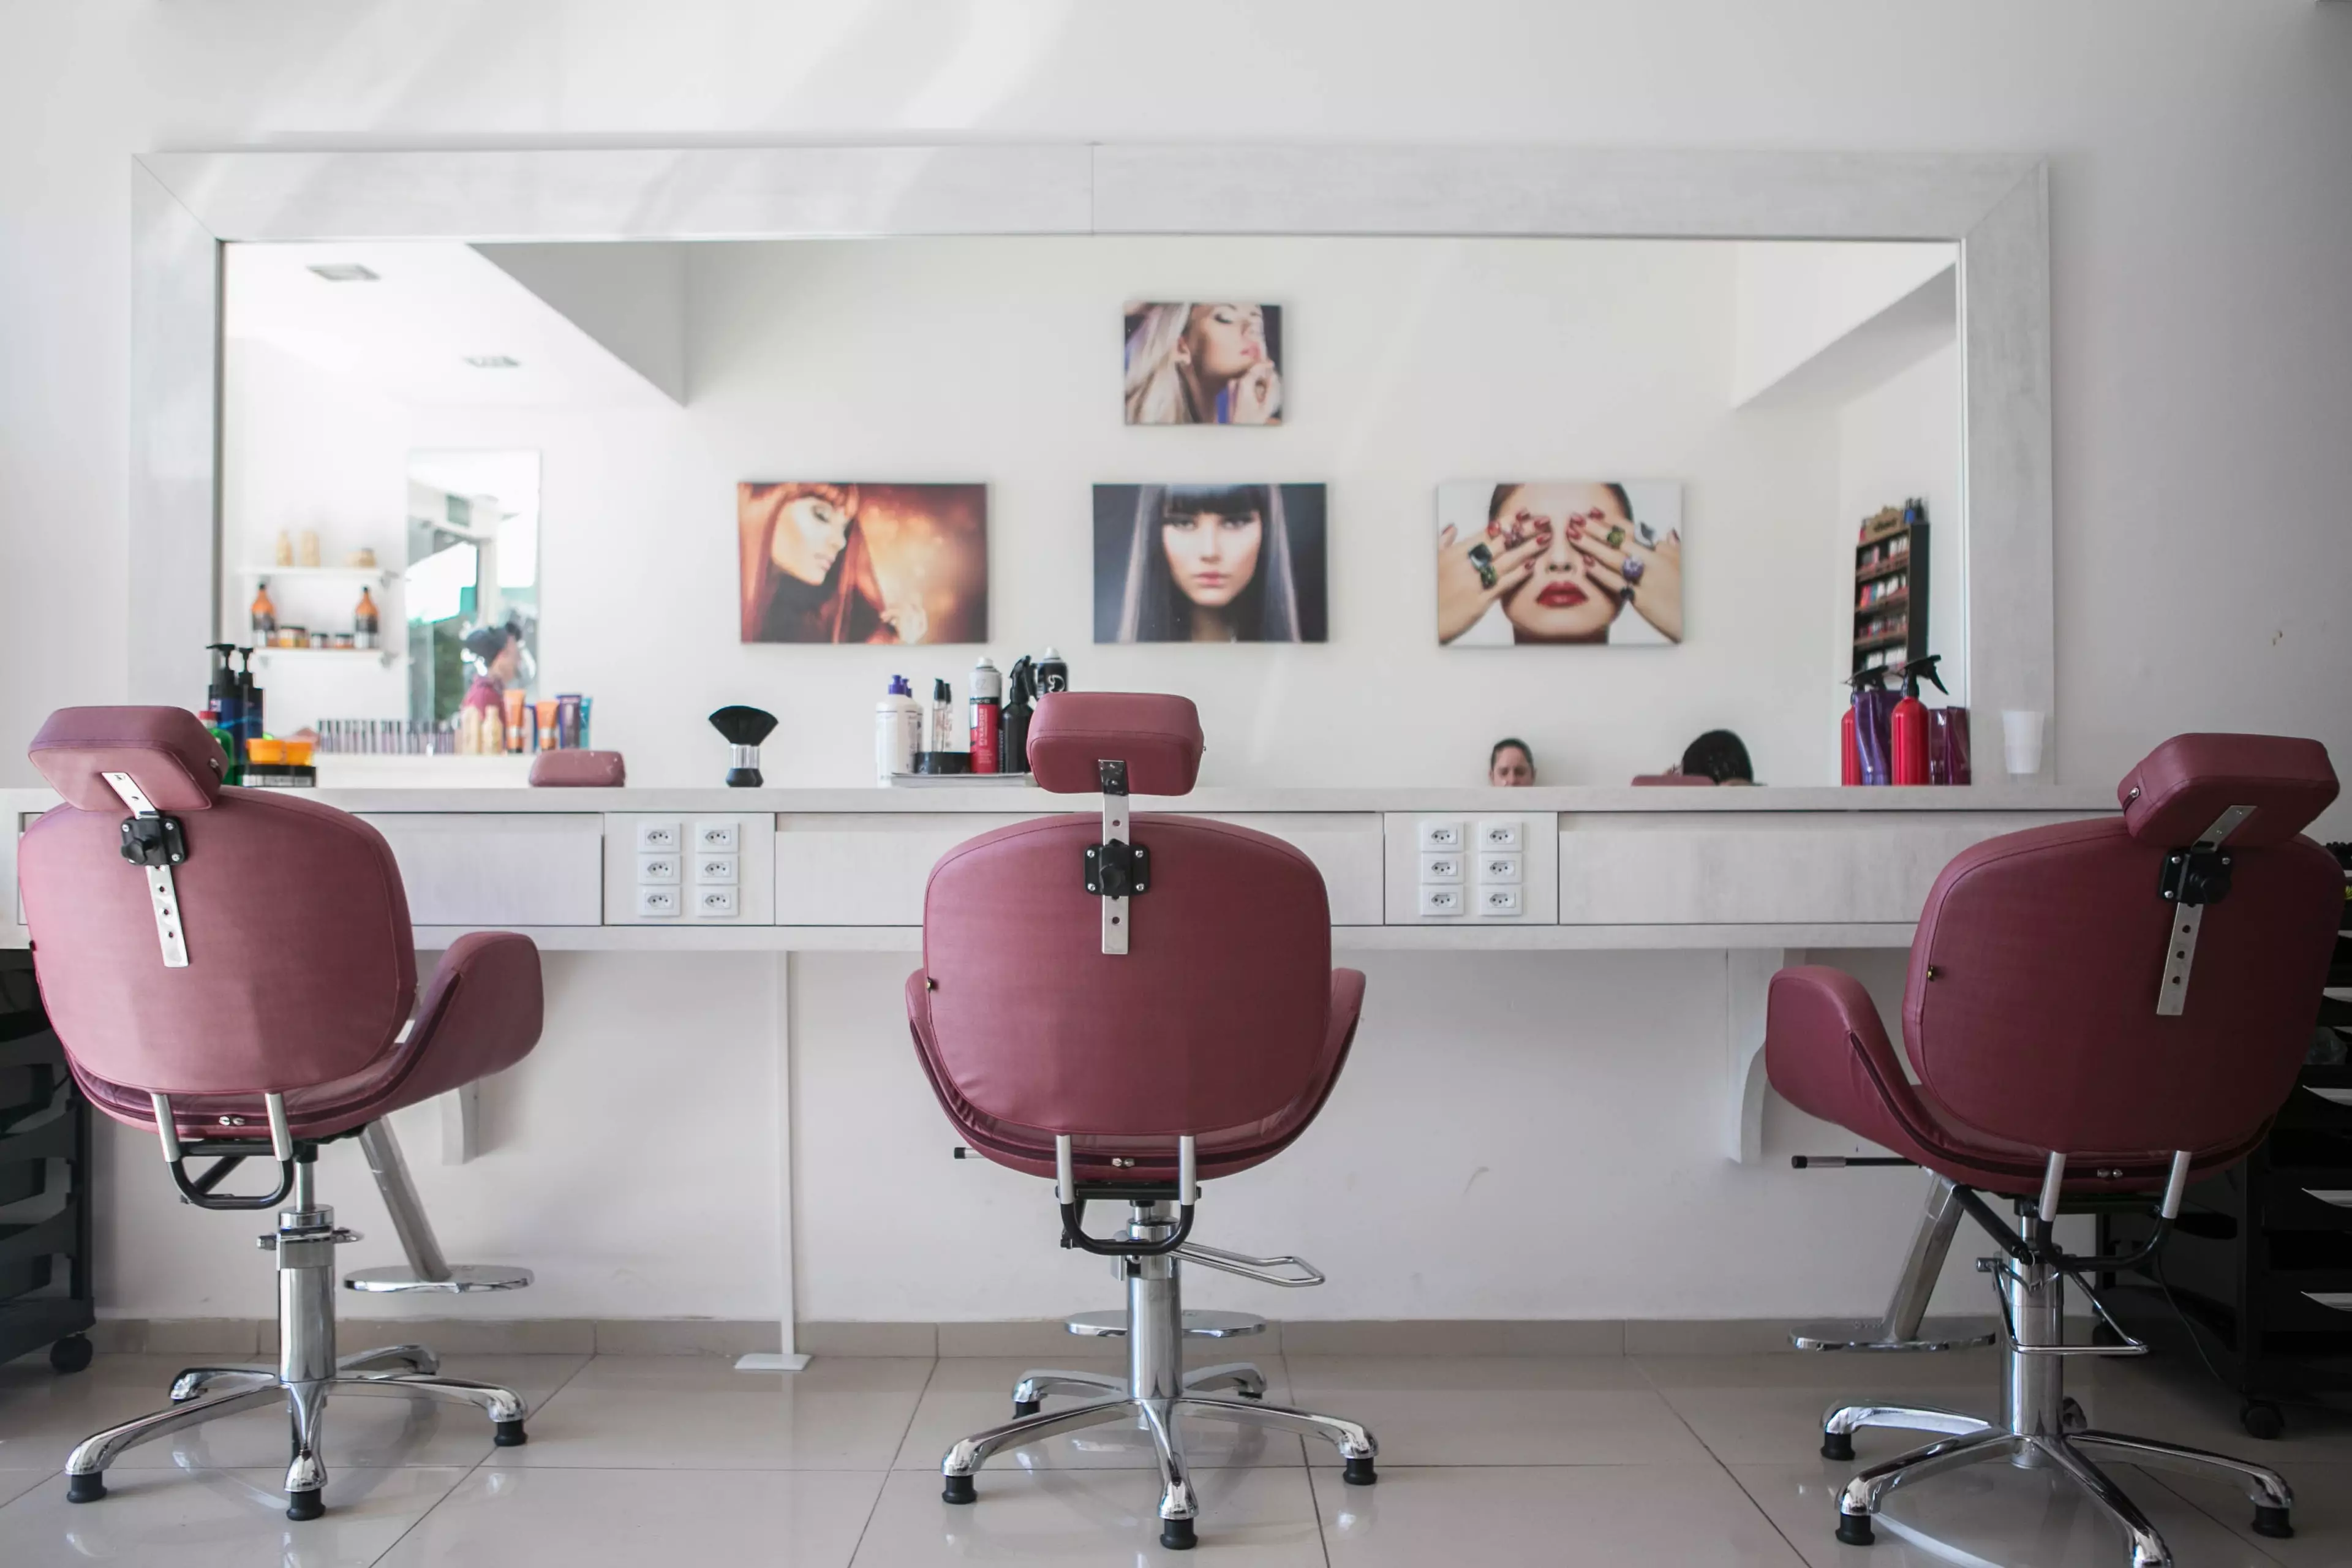 Britain's salons have been closed for over three months, so what next? (